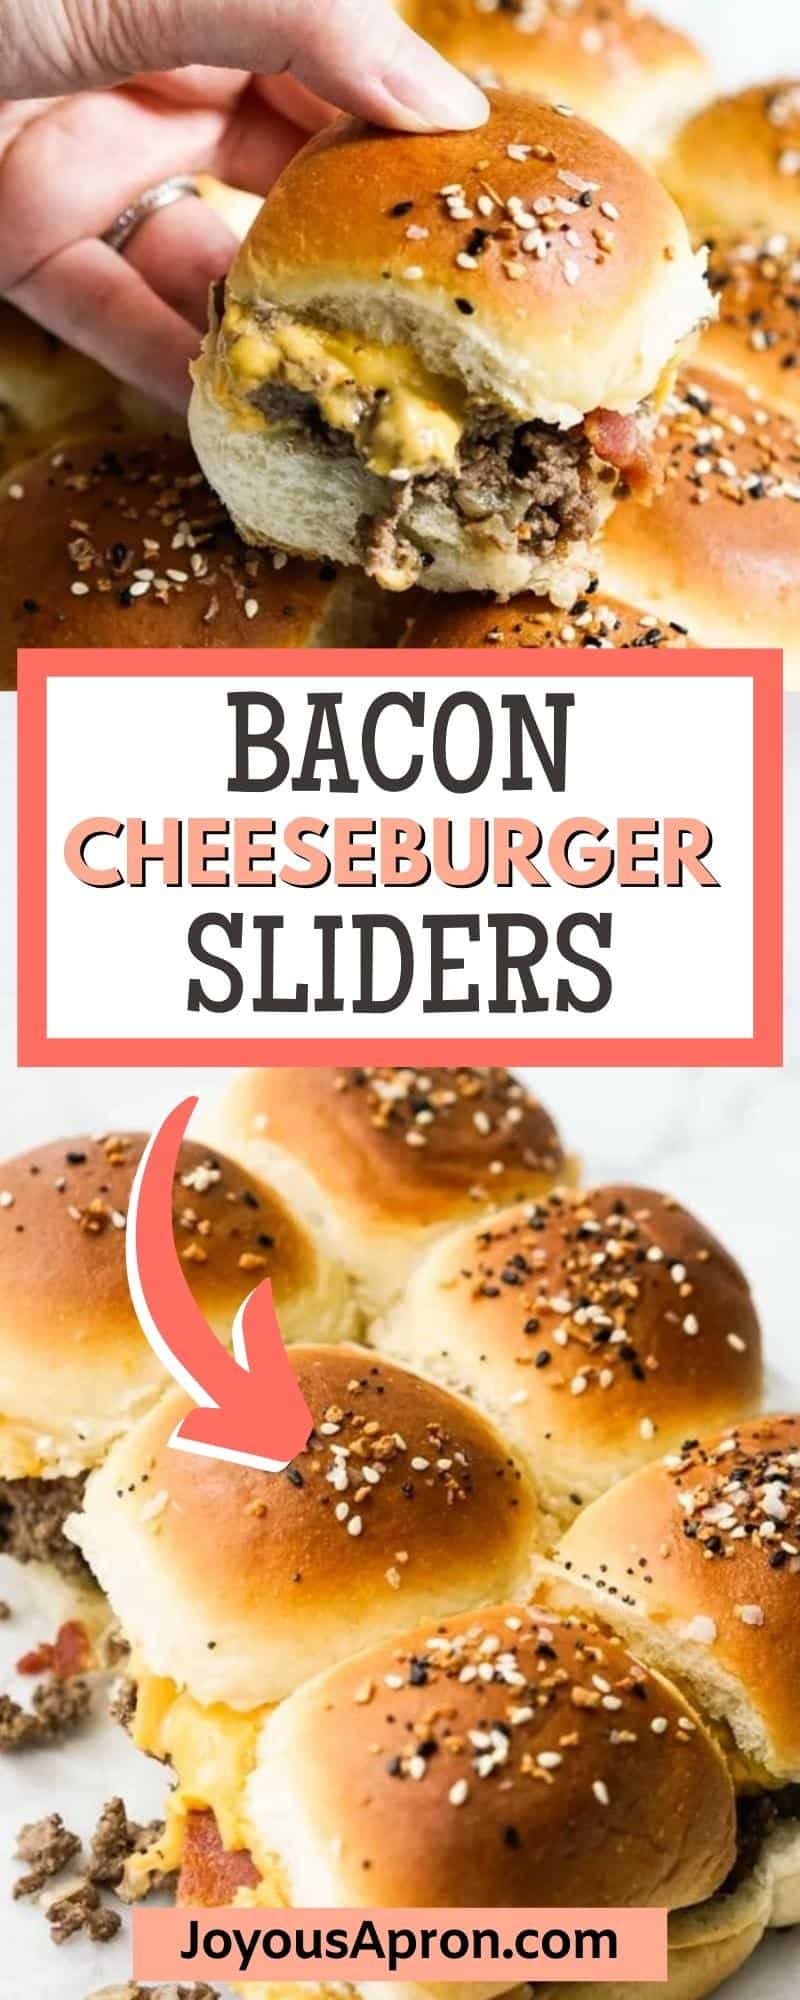 Bacon Cheeseburger Sliders in Hawaiian rolls - these oven baked mini burgers are loaded with seasoned ground beef and melted American cheese. Perfect for game day and parties. via @joyousapron